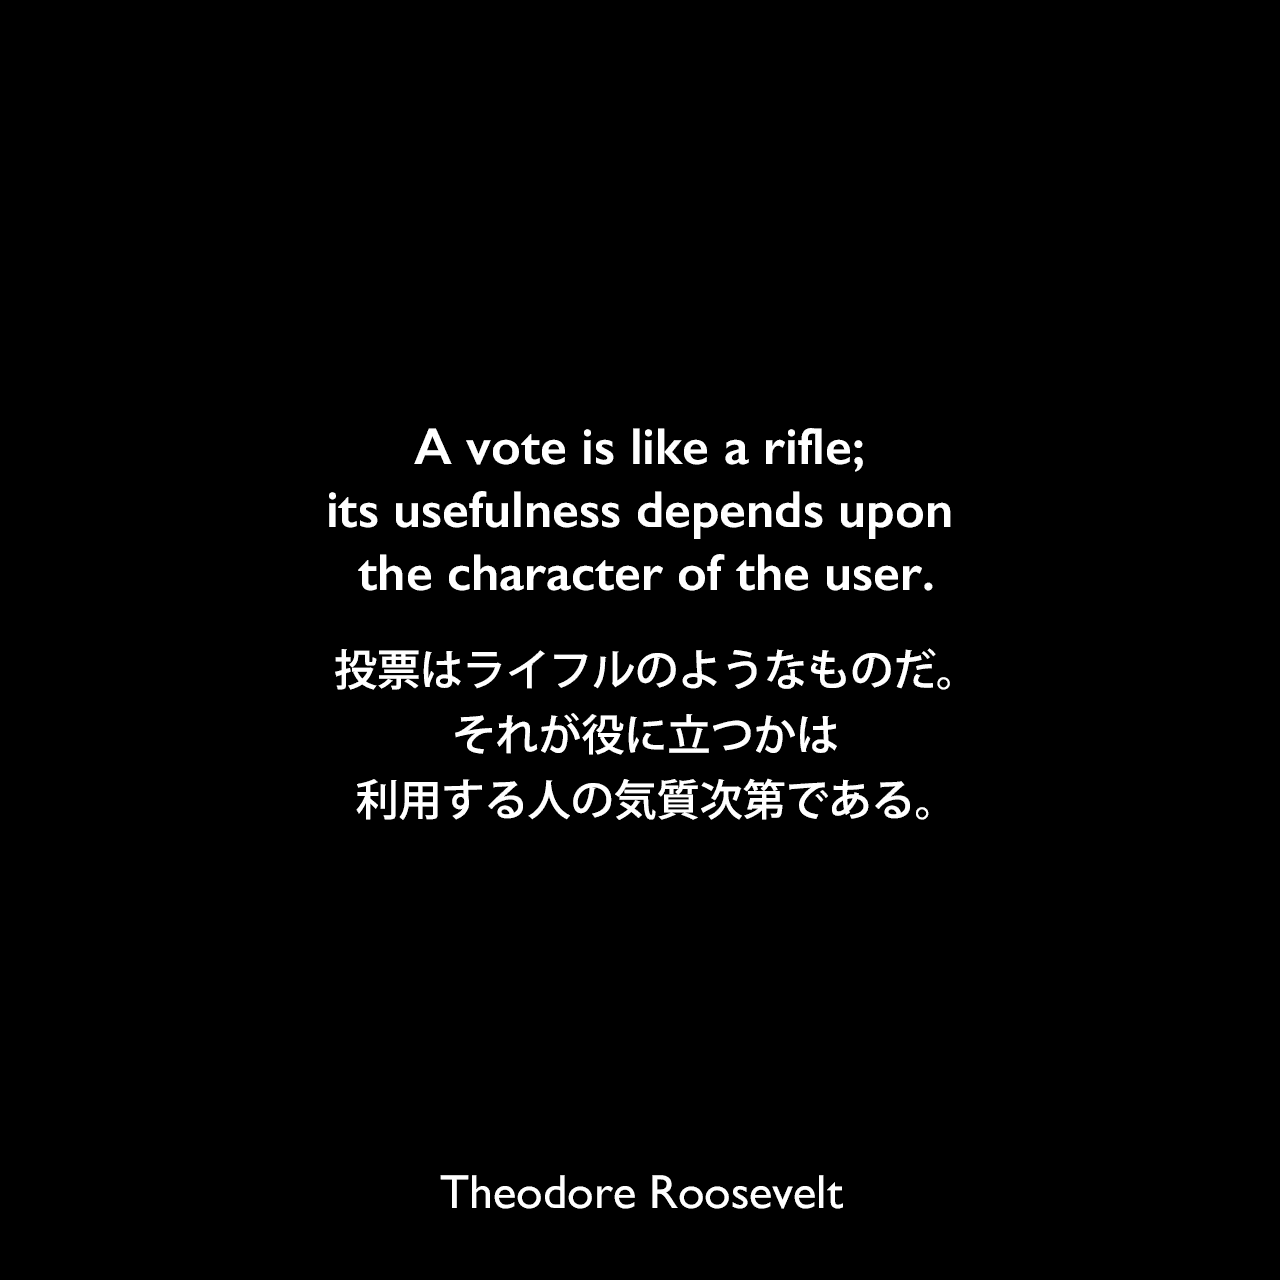 A vote is like a rifle; its usefulness depends upon the character of the user.投票はライフルのようなものだ。それが役に立つかは、利用する人の気質次第である。- セオドア・ルーズベルトによる本「Theodore Roosevelt, An Autobiography」よりTheodore Roosevelt